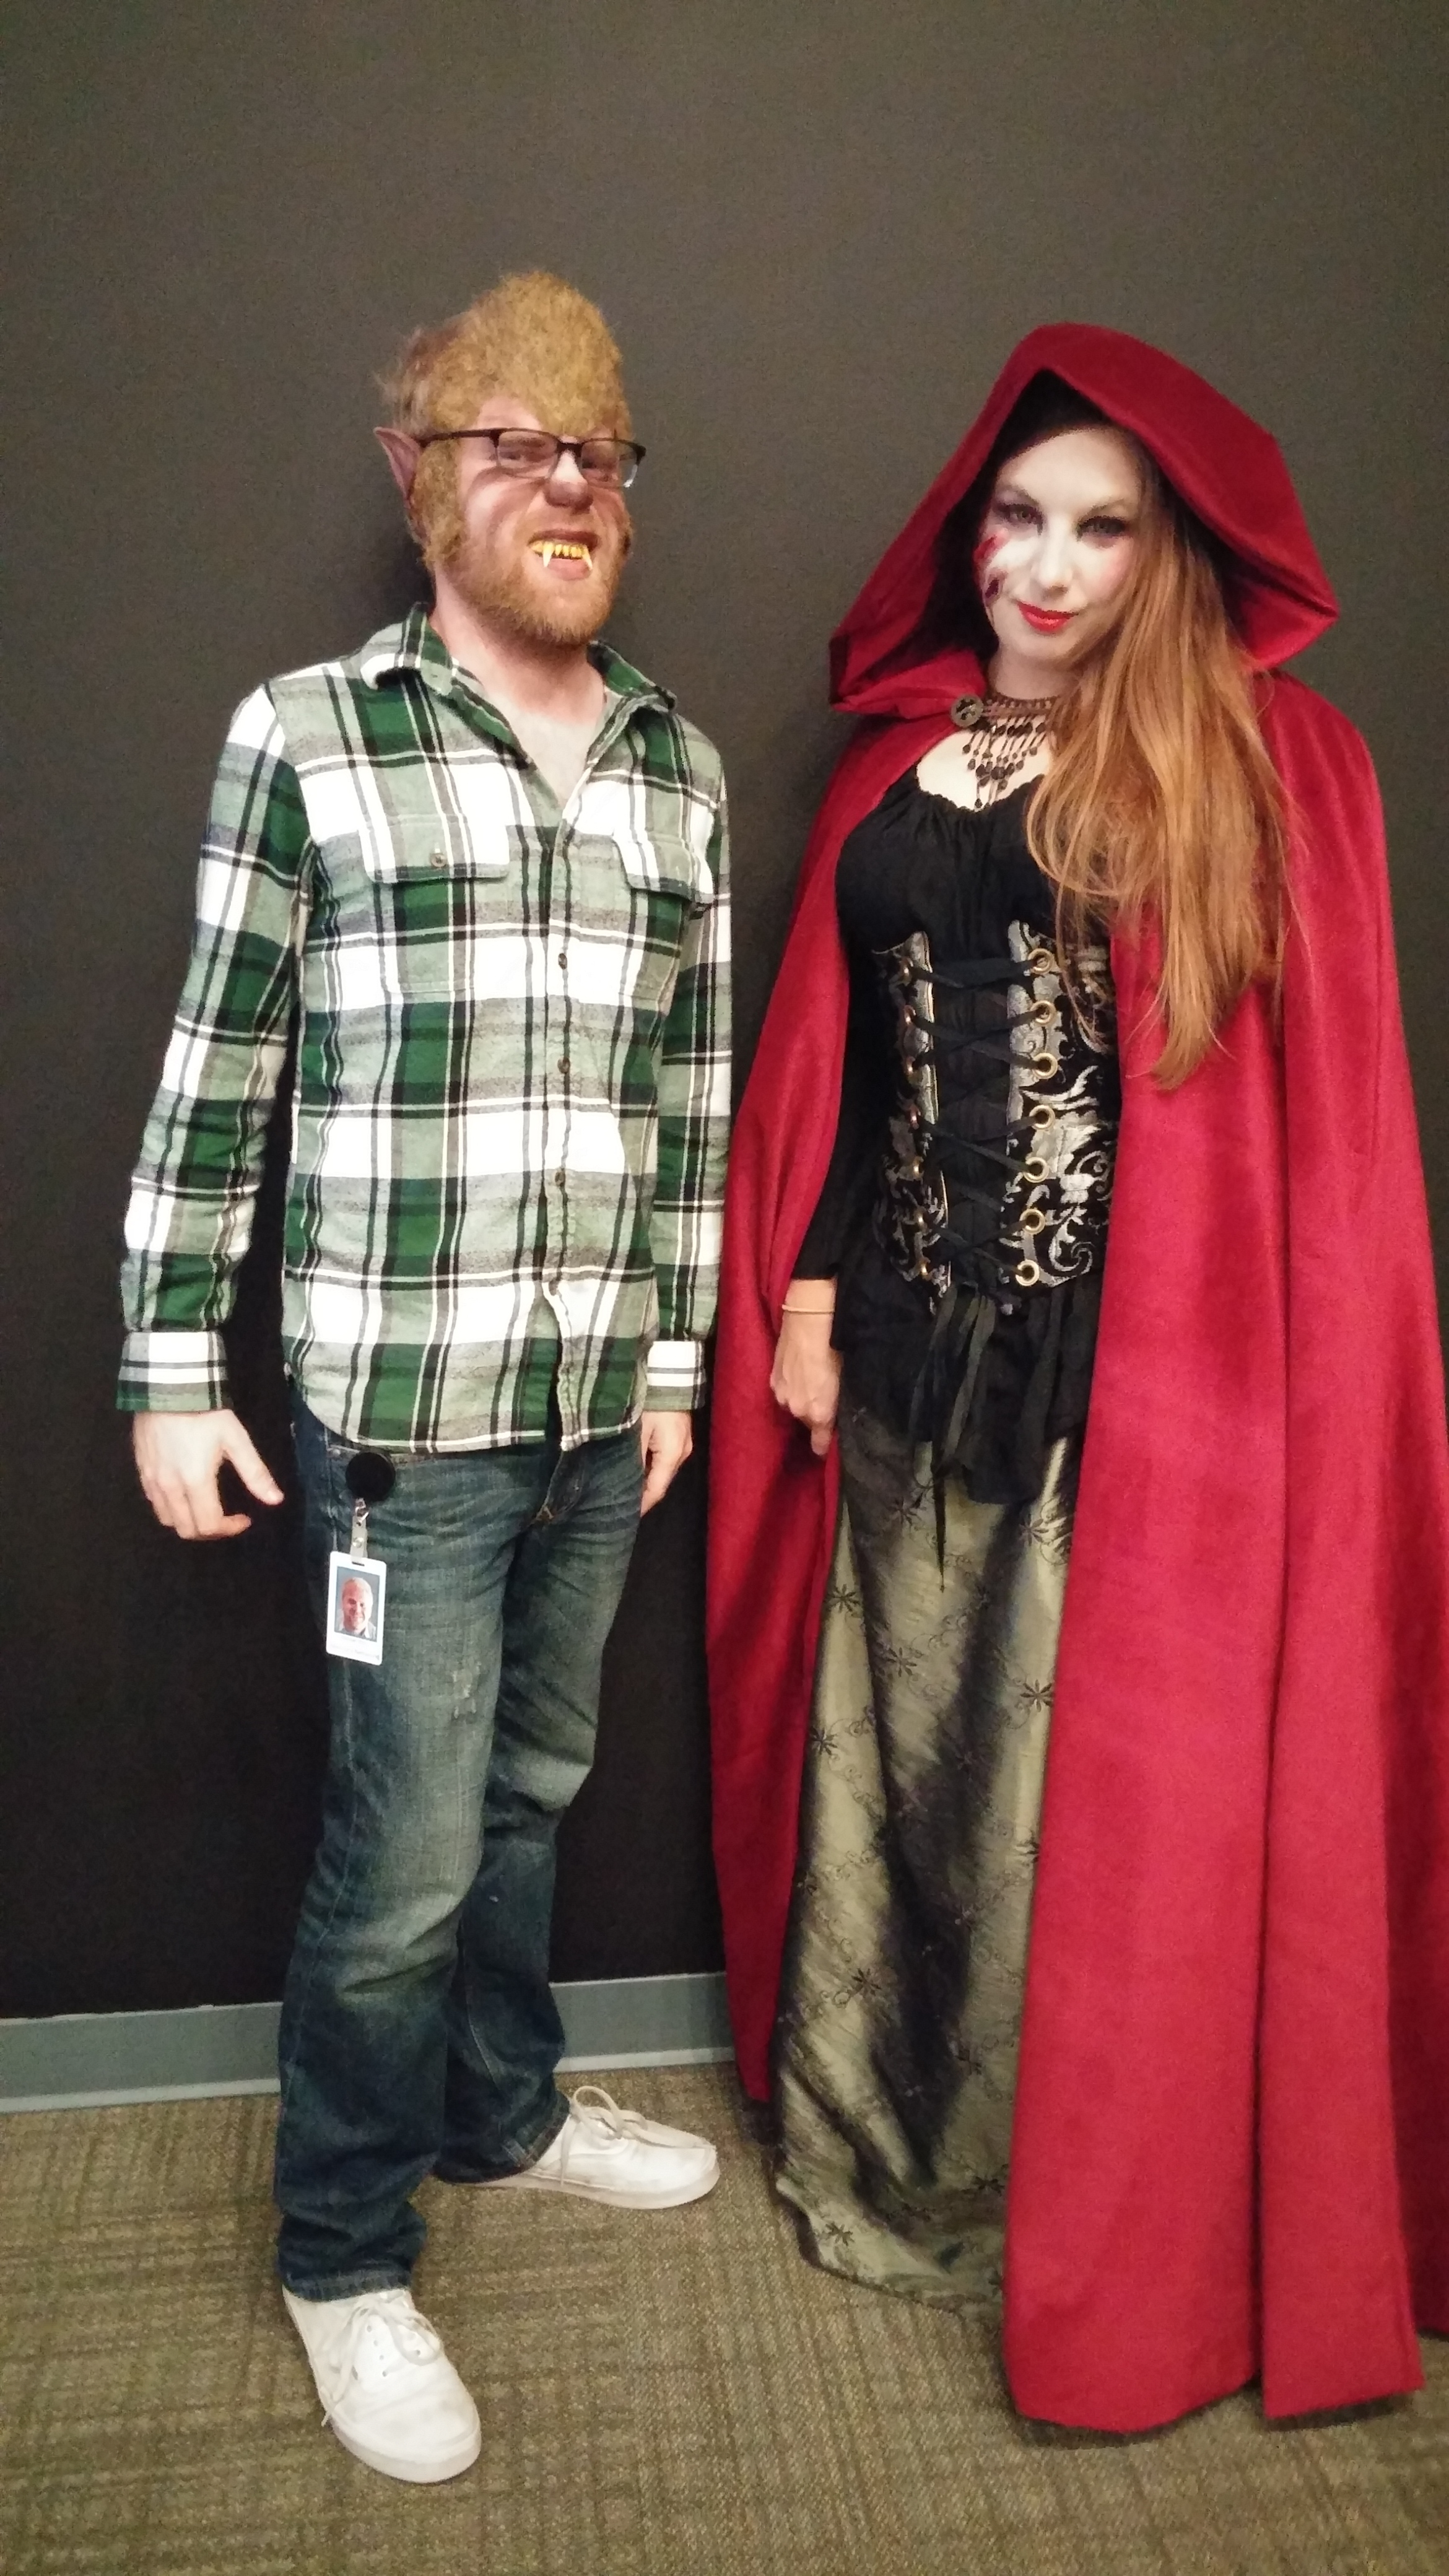 Red Riding Hood and the Wolf!